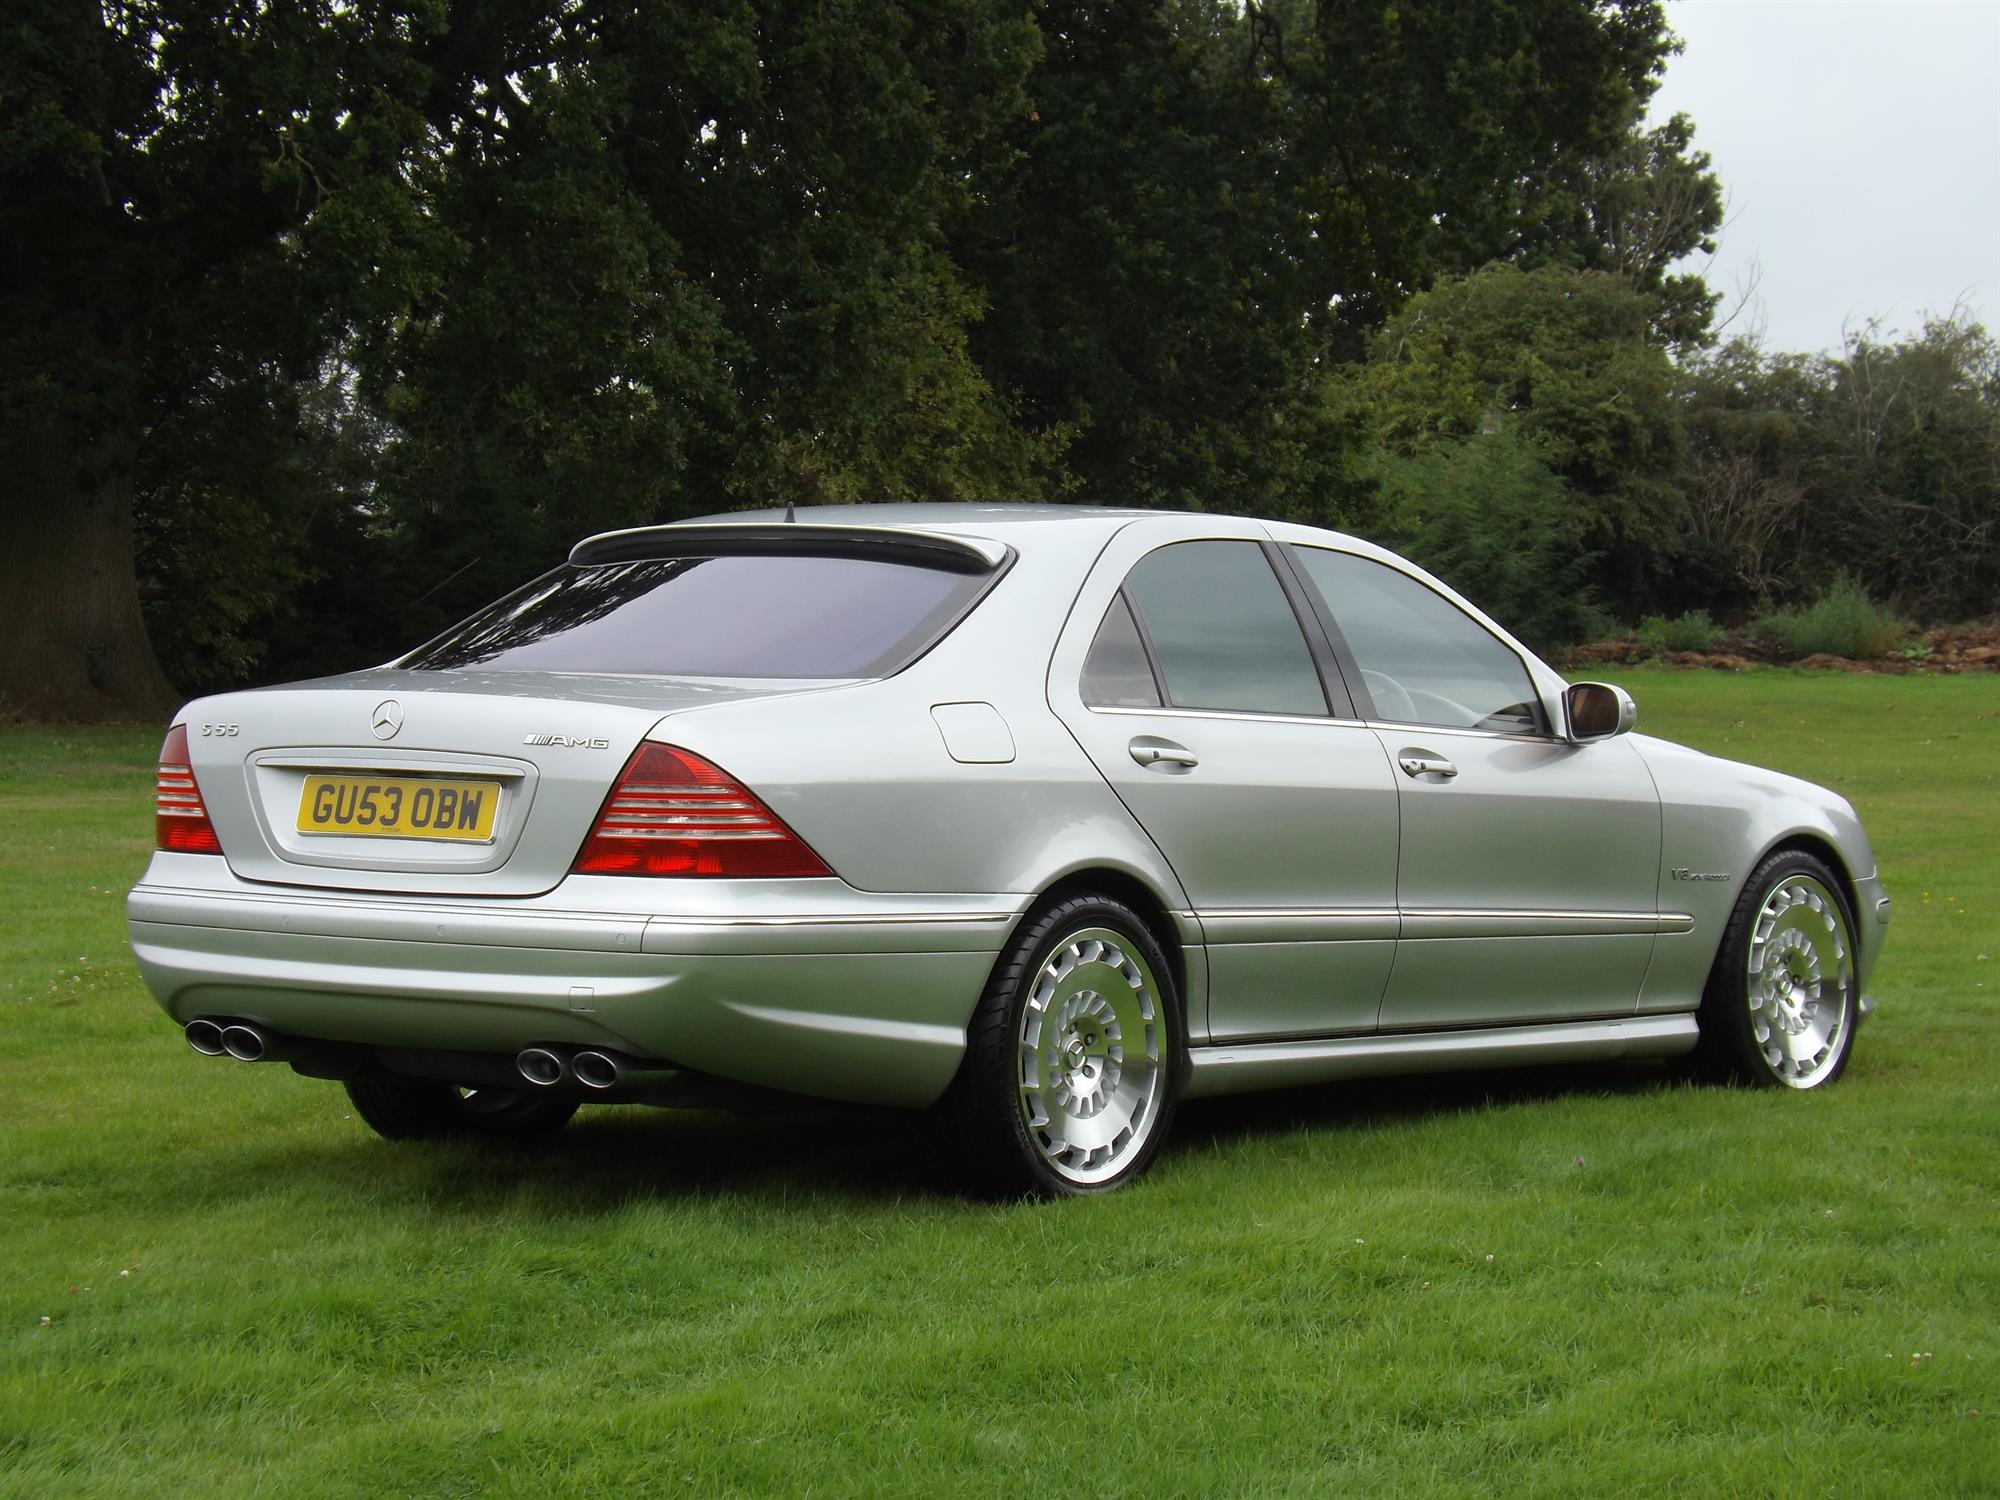 2003 Mercedes-Benz S55 AMG (W220) - Image 3 of 4